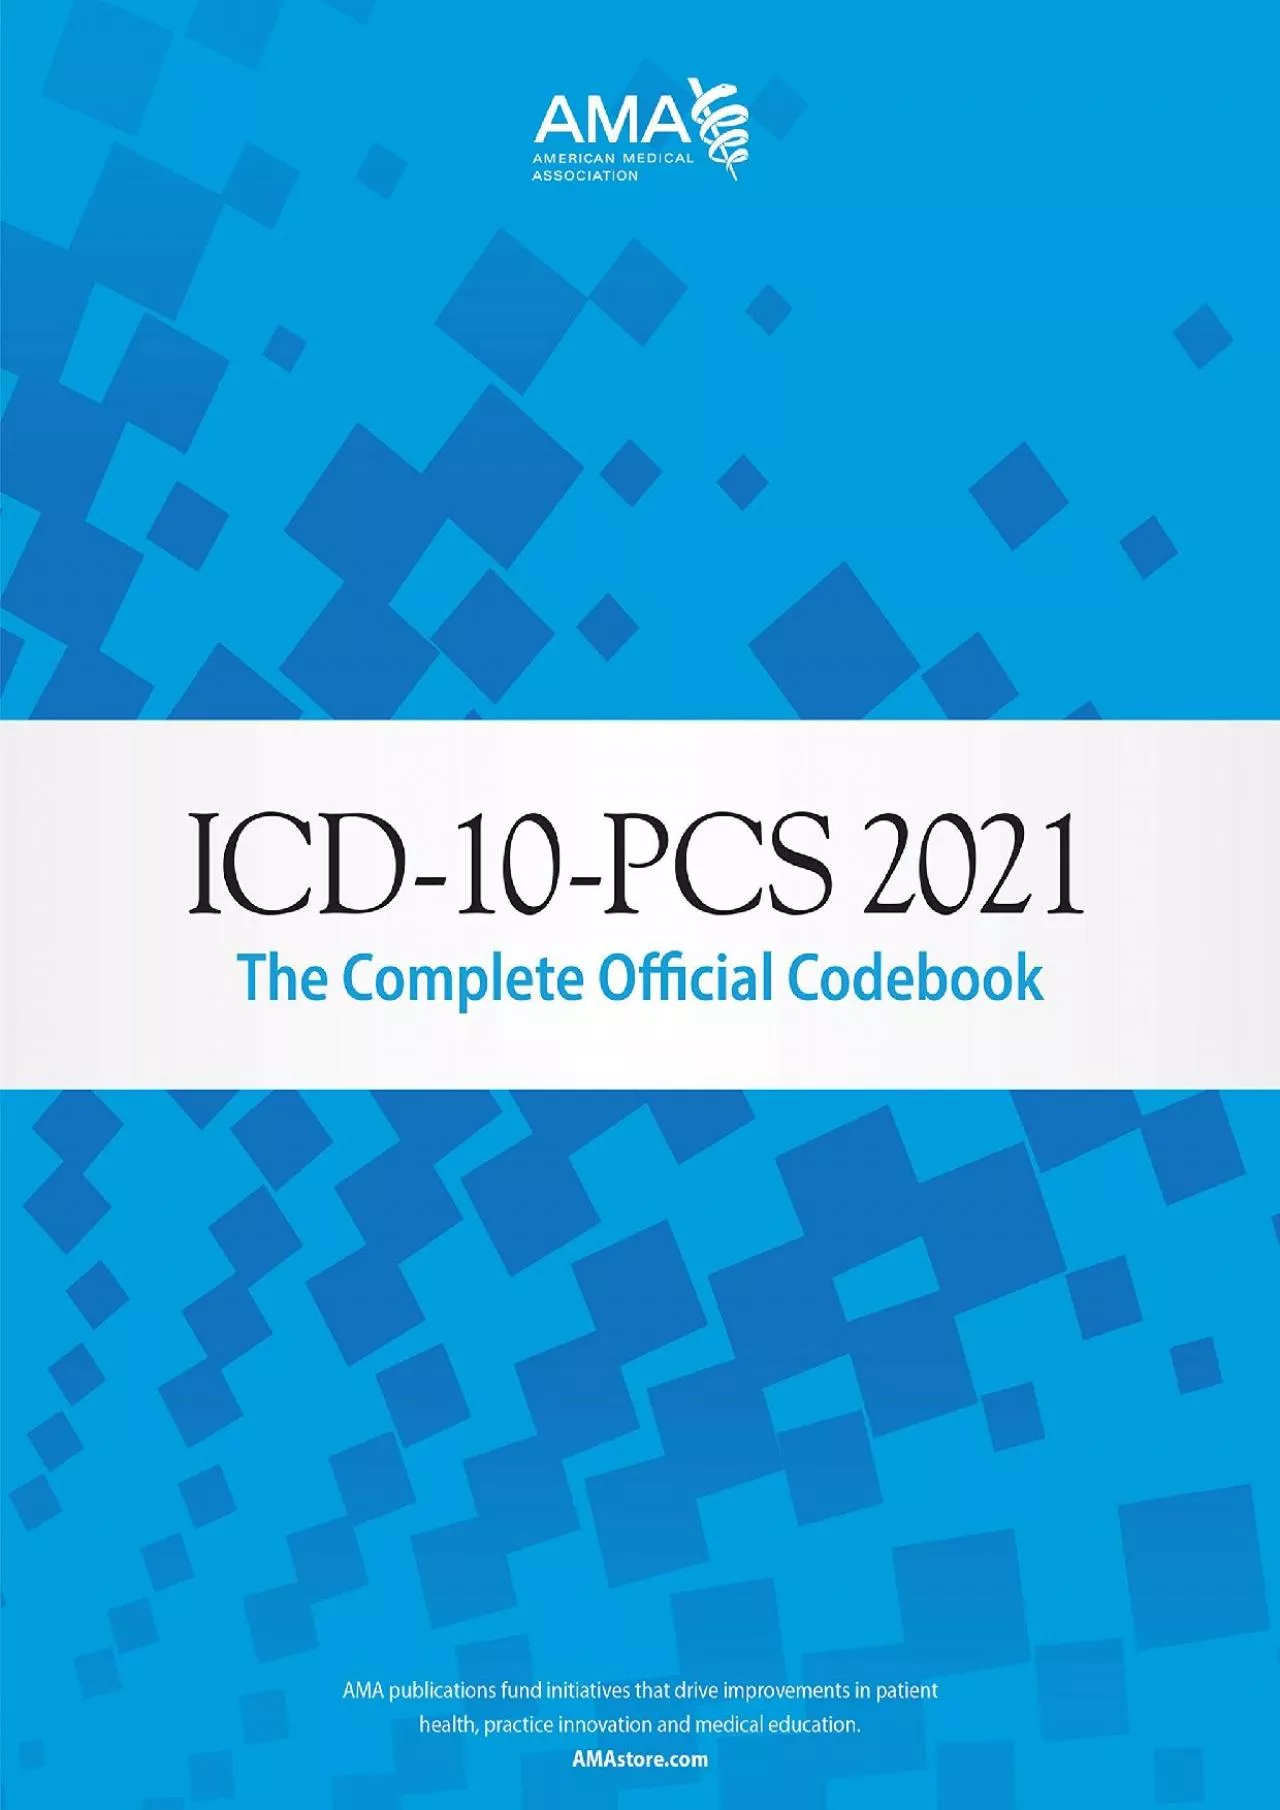 (EBOOK)-ICD-10-PCS 2021: The Complete Official Codebook